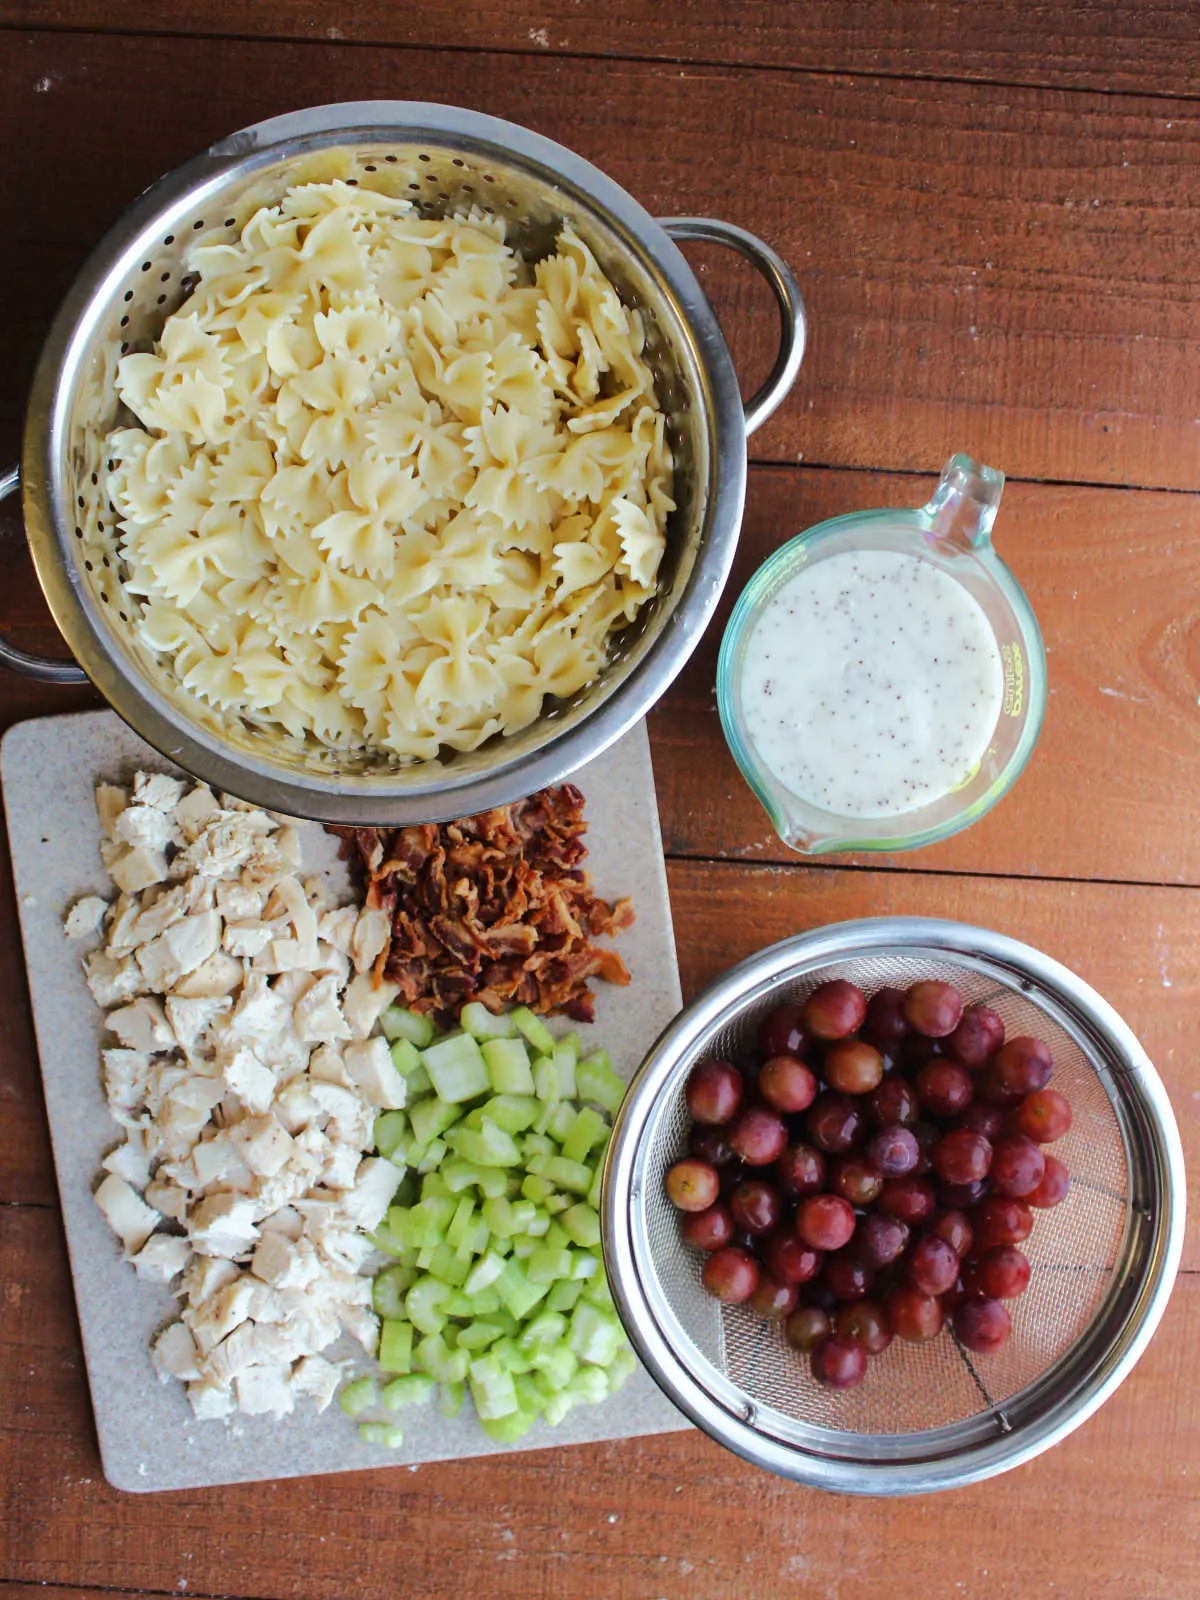 Ingredients for poppy seed pasta salad including cooked pasta, creamy poppy seed dressing, washed grapes, chopped celery, crumbled bacon, and cooked chicken.